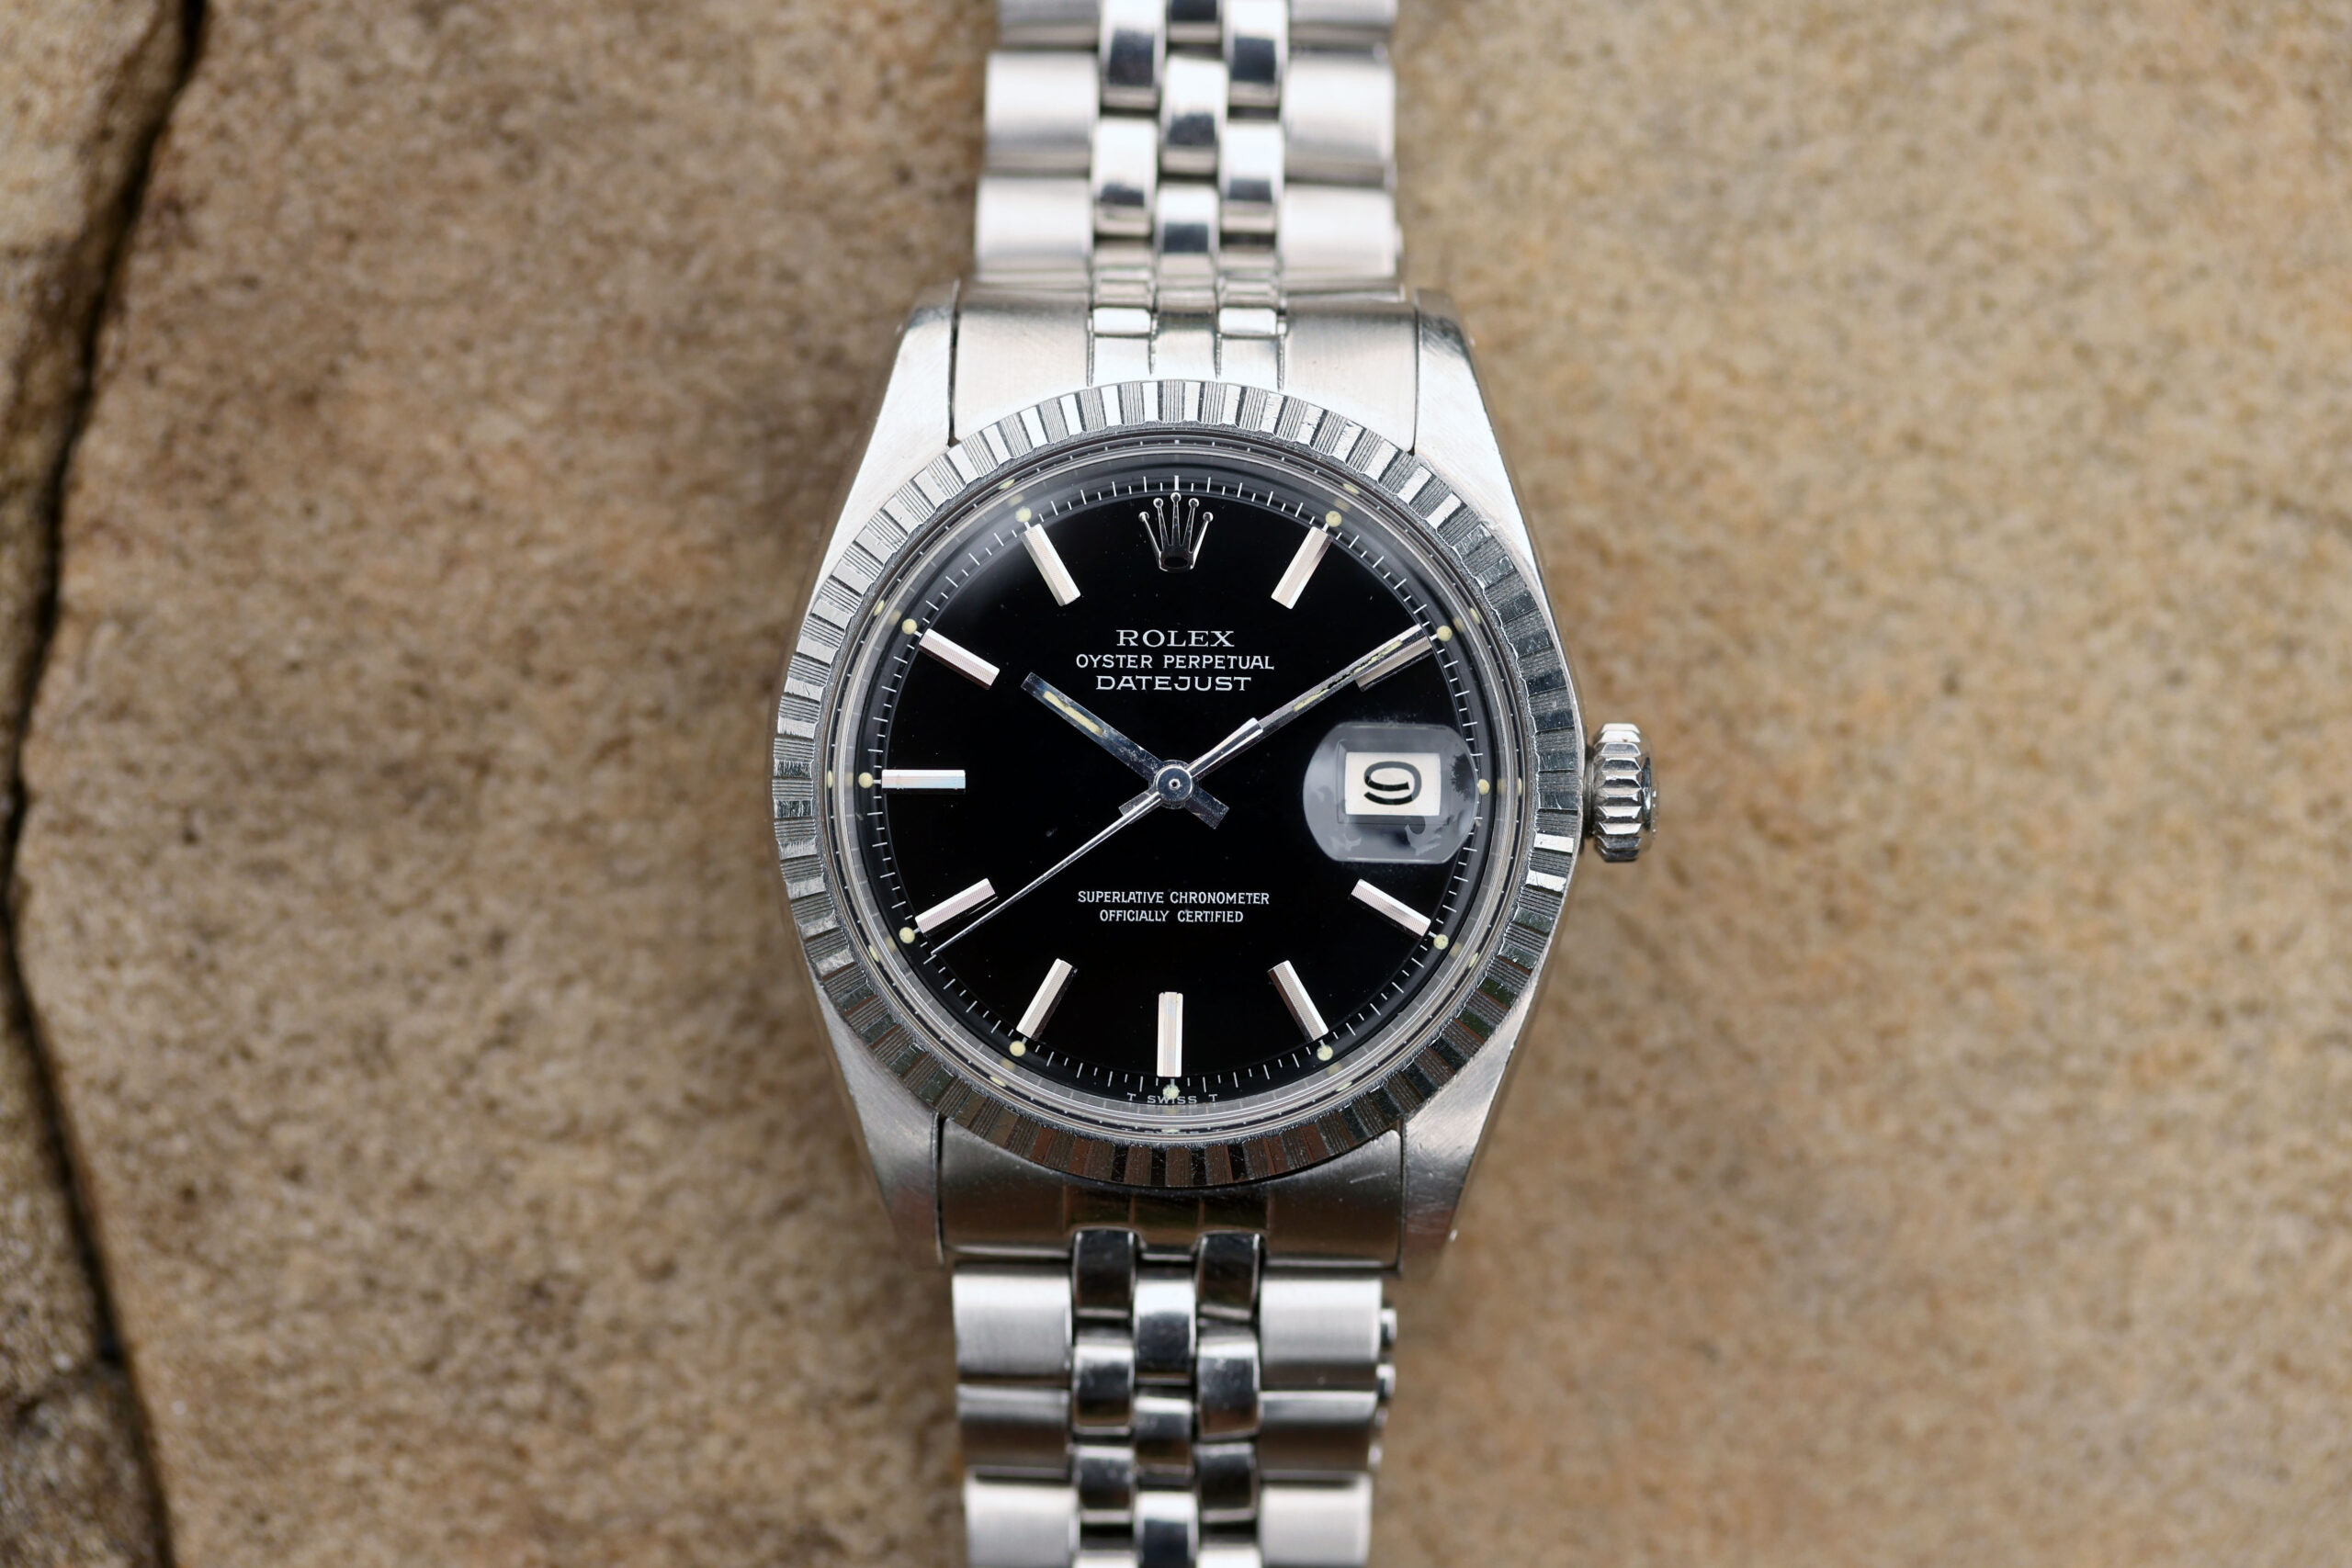 1973 Rolex DateJust ref. 1603 Black Glossy Dial - Lunar - Buying and Selling